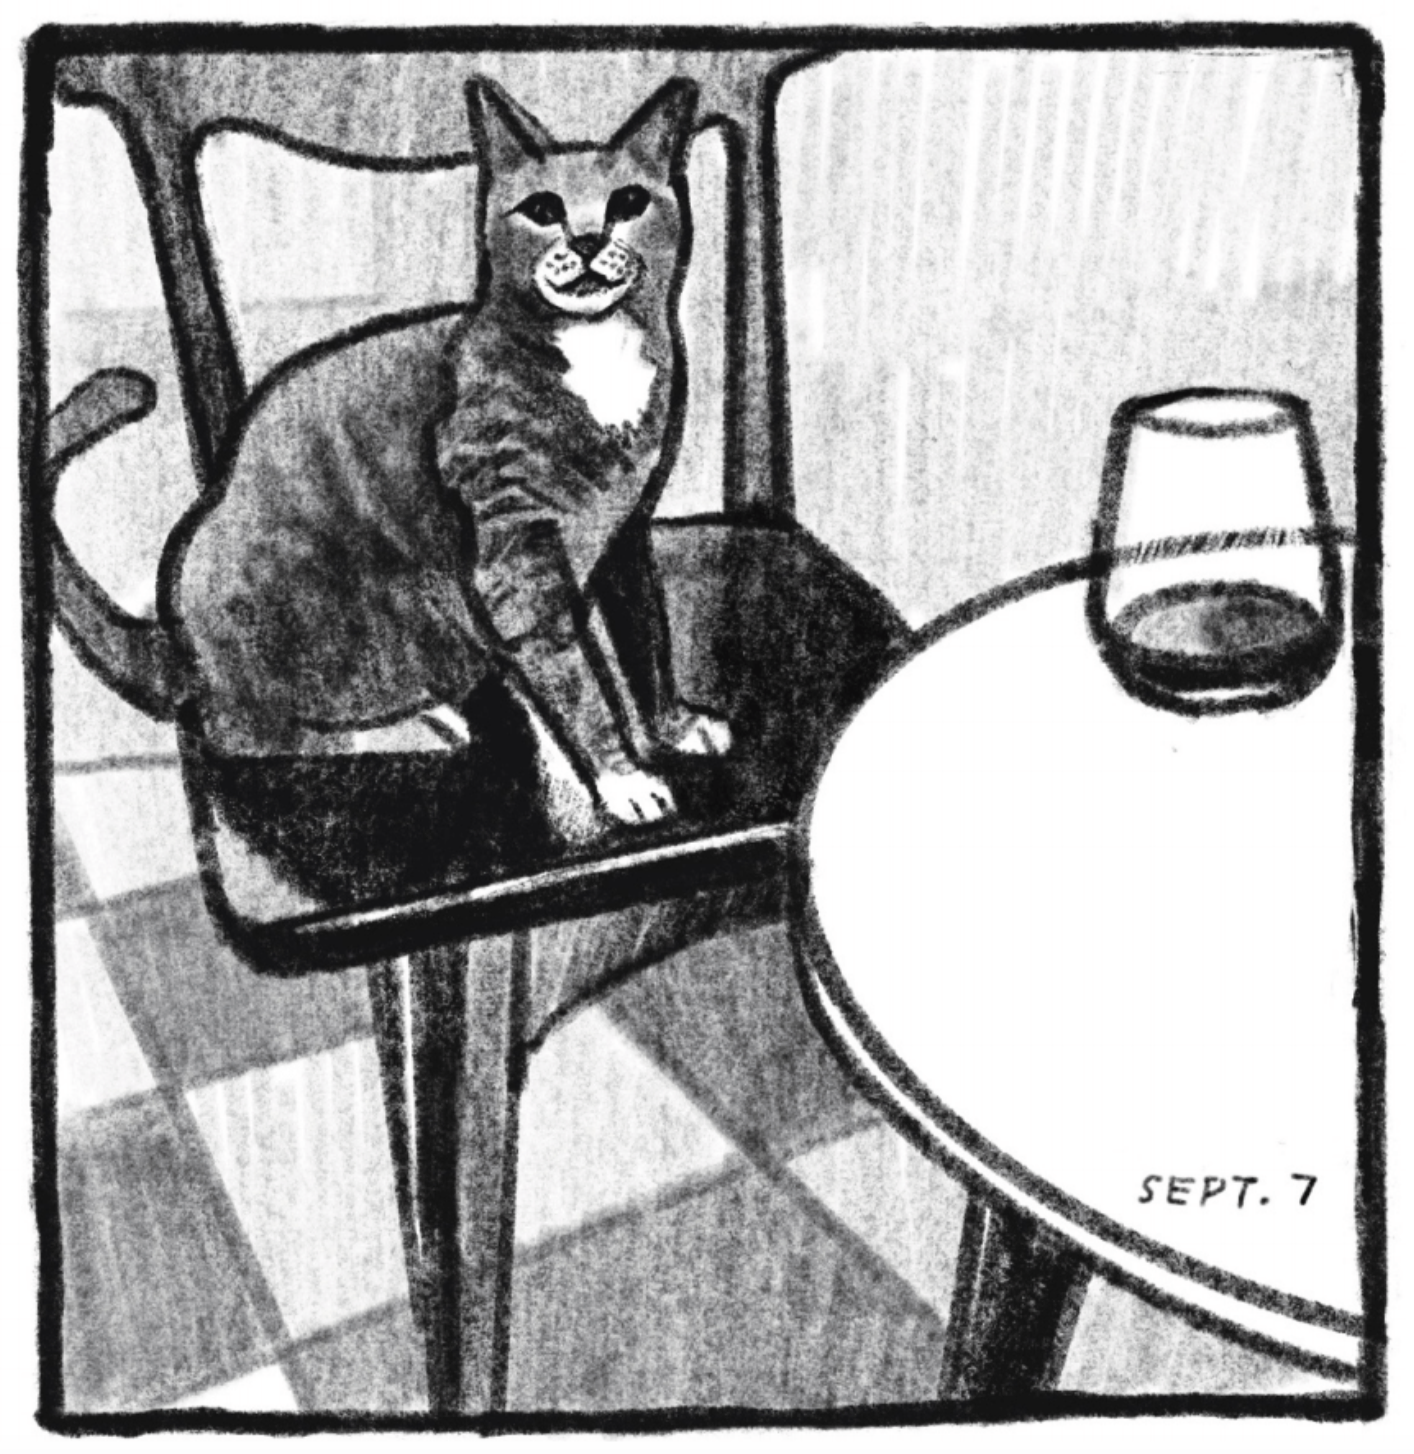 Tonks the cat sits in a kitchen chair, smiling at the reader/photographer. On the table in front of him is a stemless wine glass, mostly empty. â€œSept. 7.â€